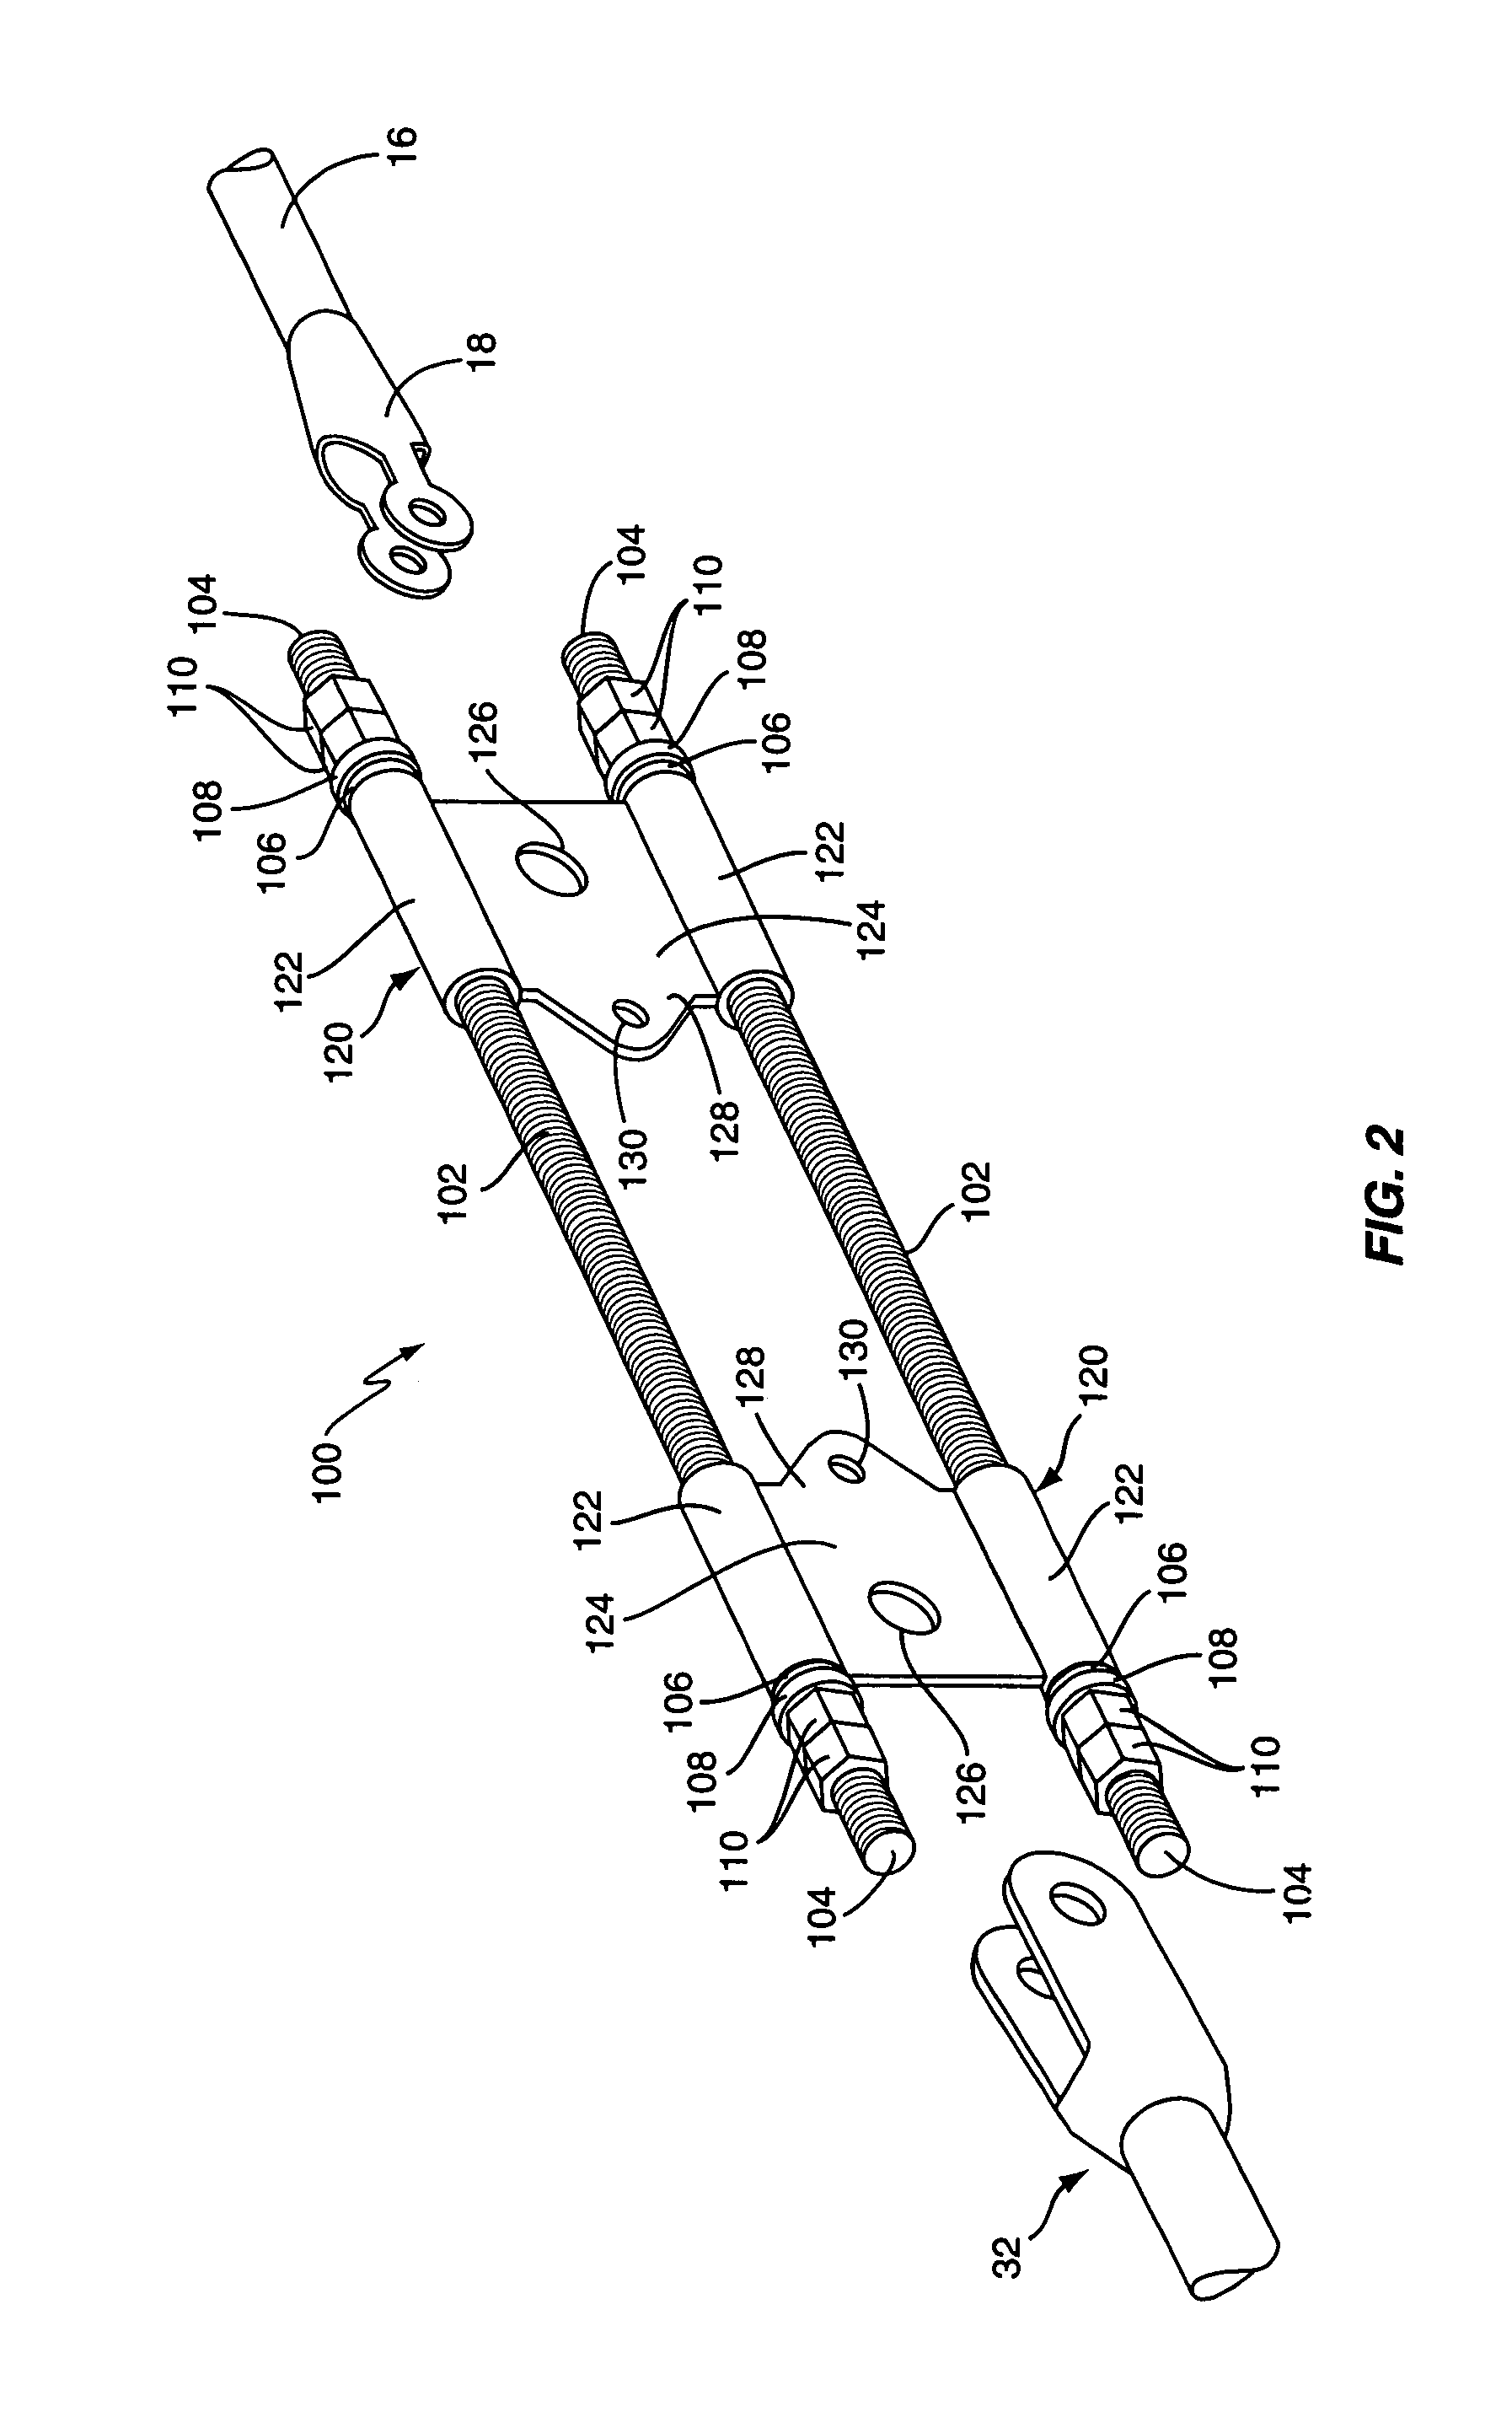 Extended length strand take up device